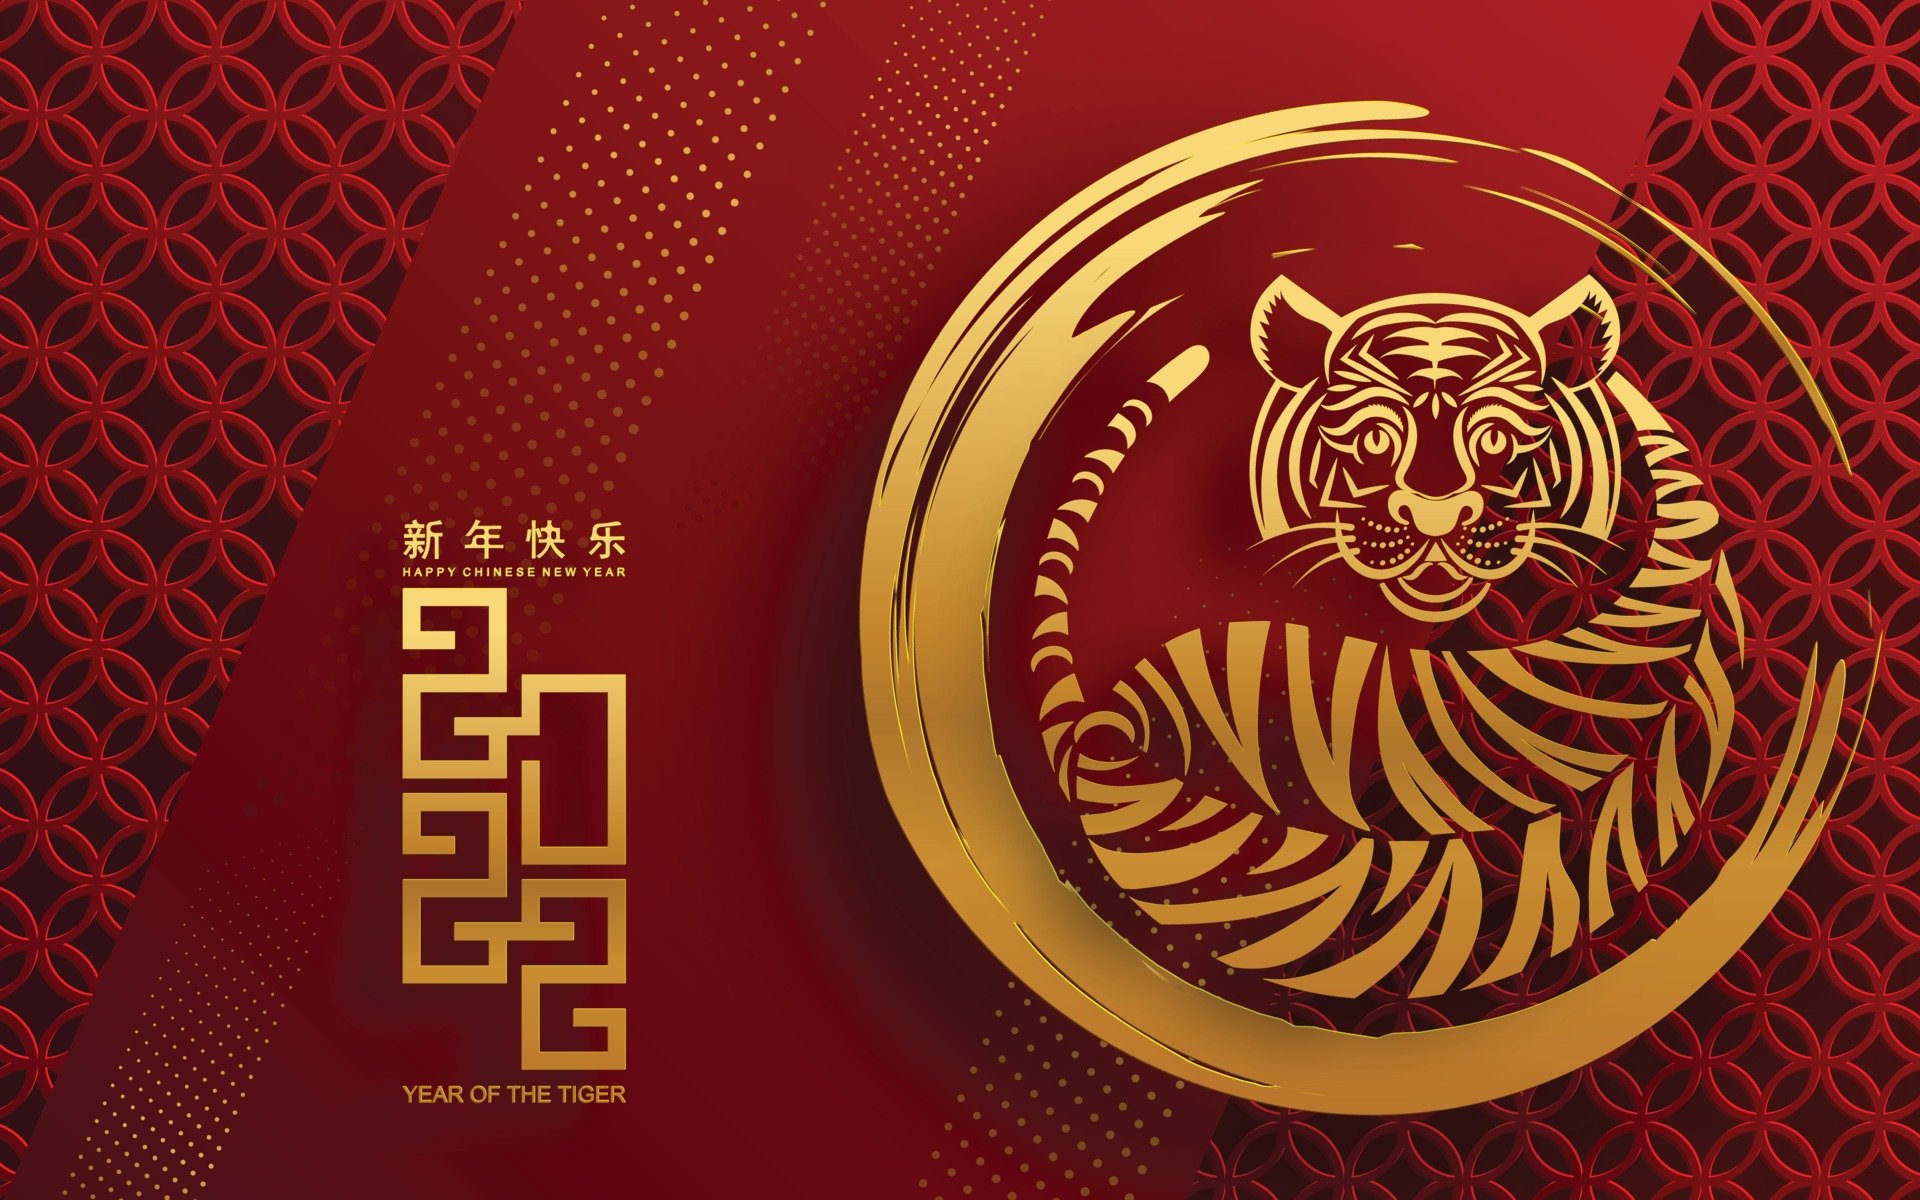 holiday, chinese new year, year of the tiger